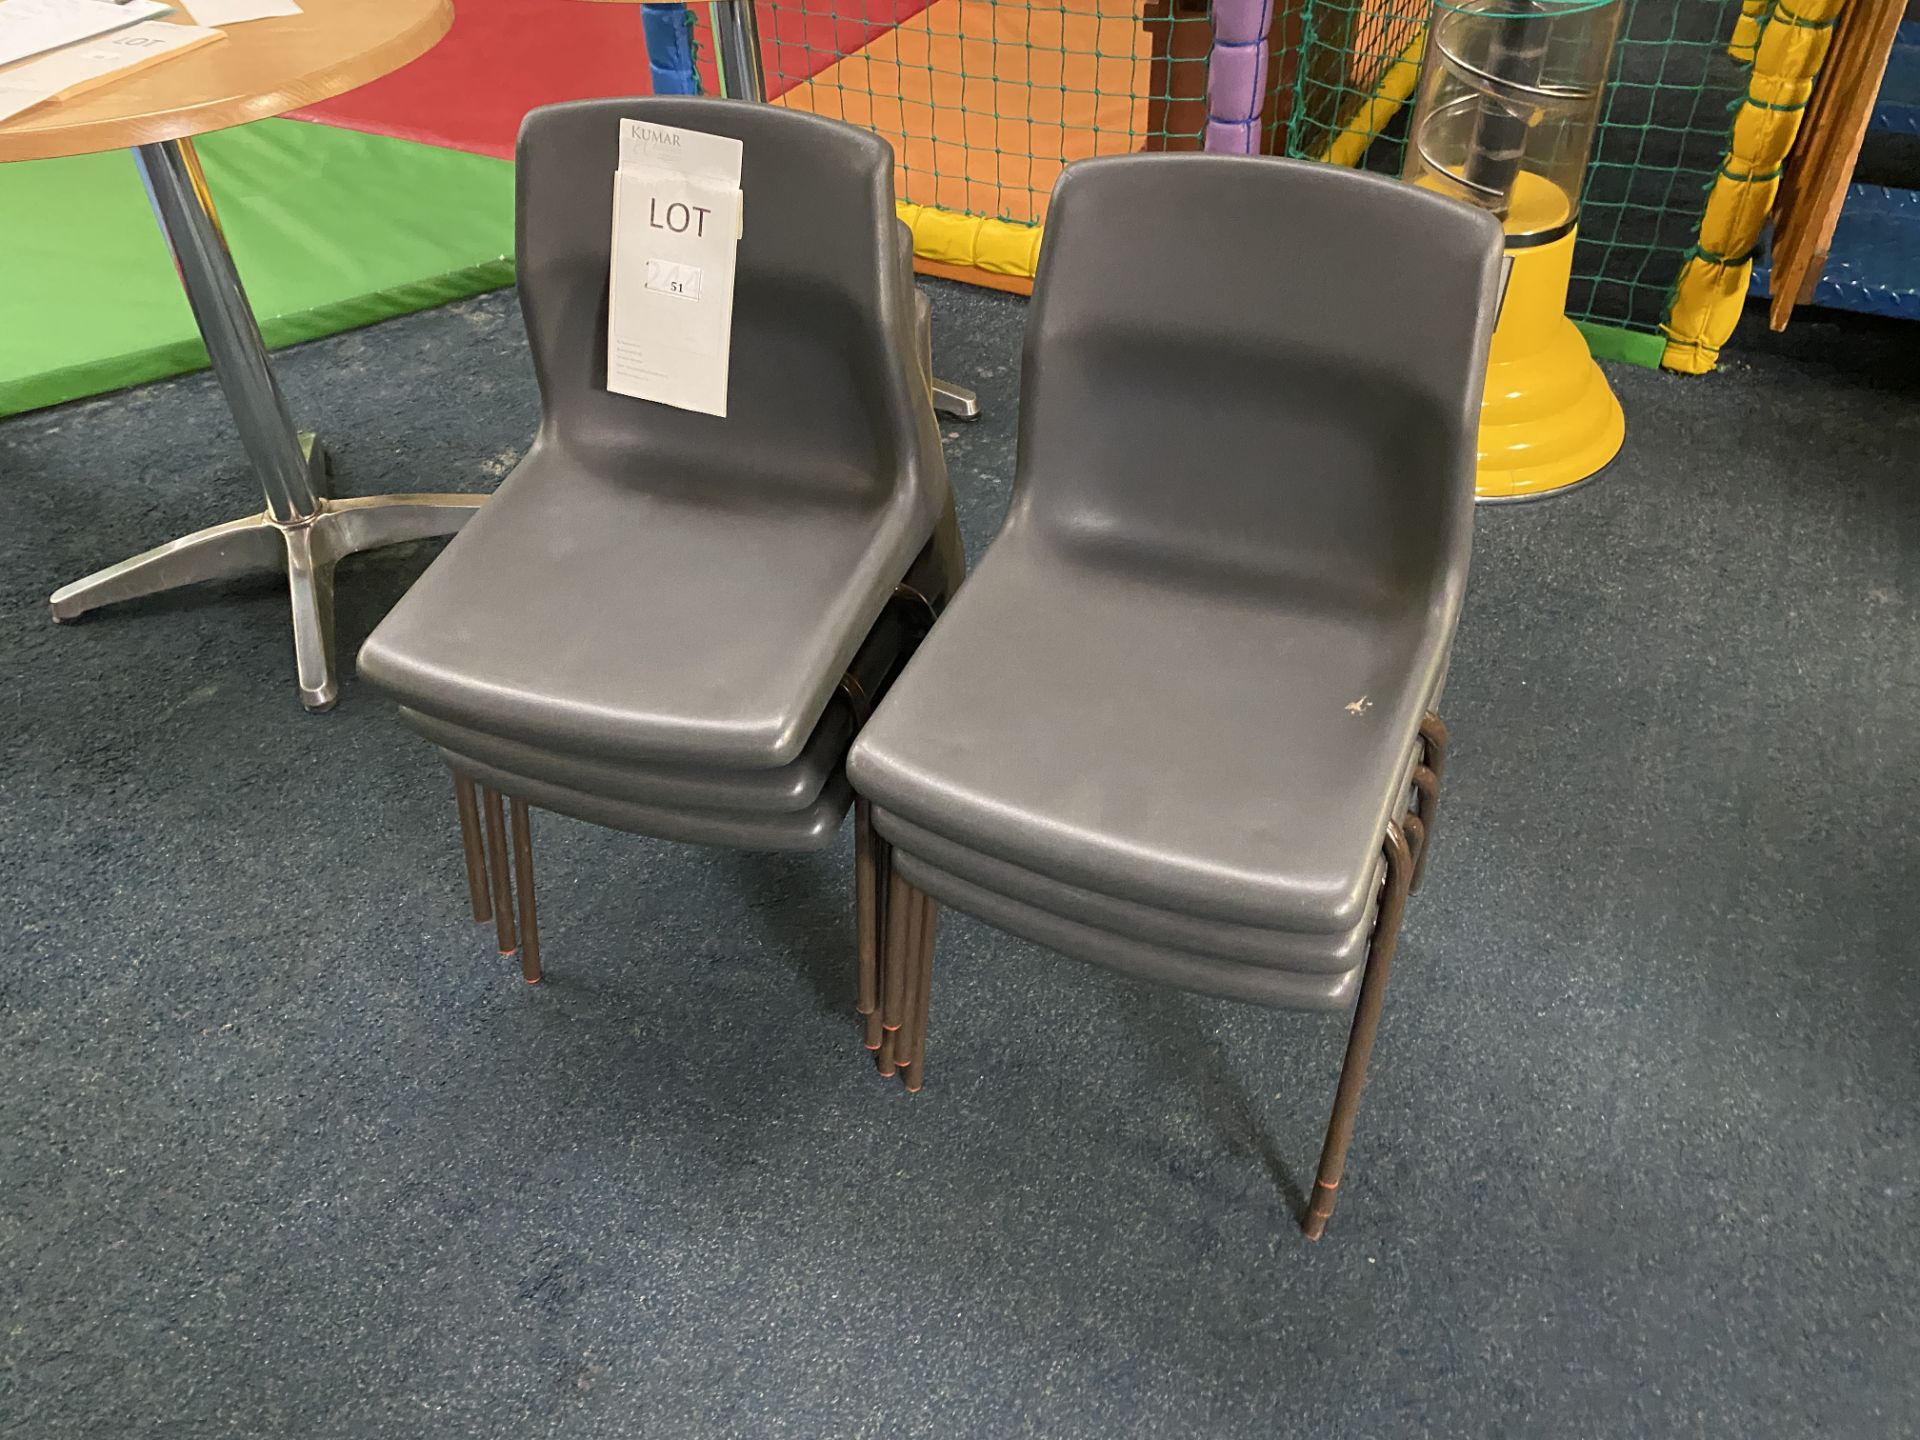 6x Small Plastic Children's Chairs - Image 2 of 4